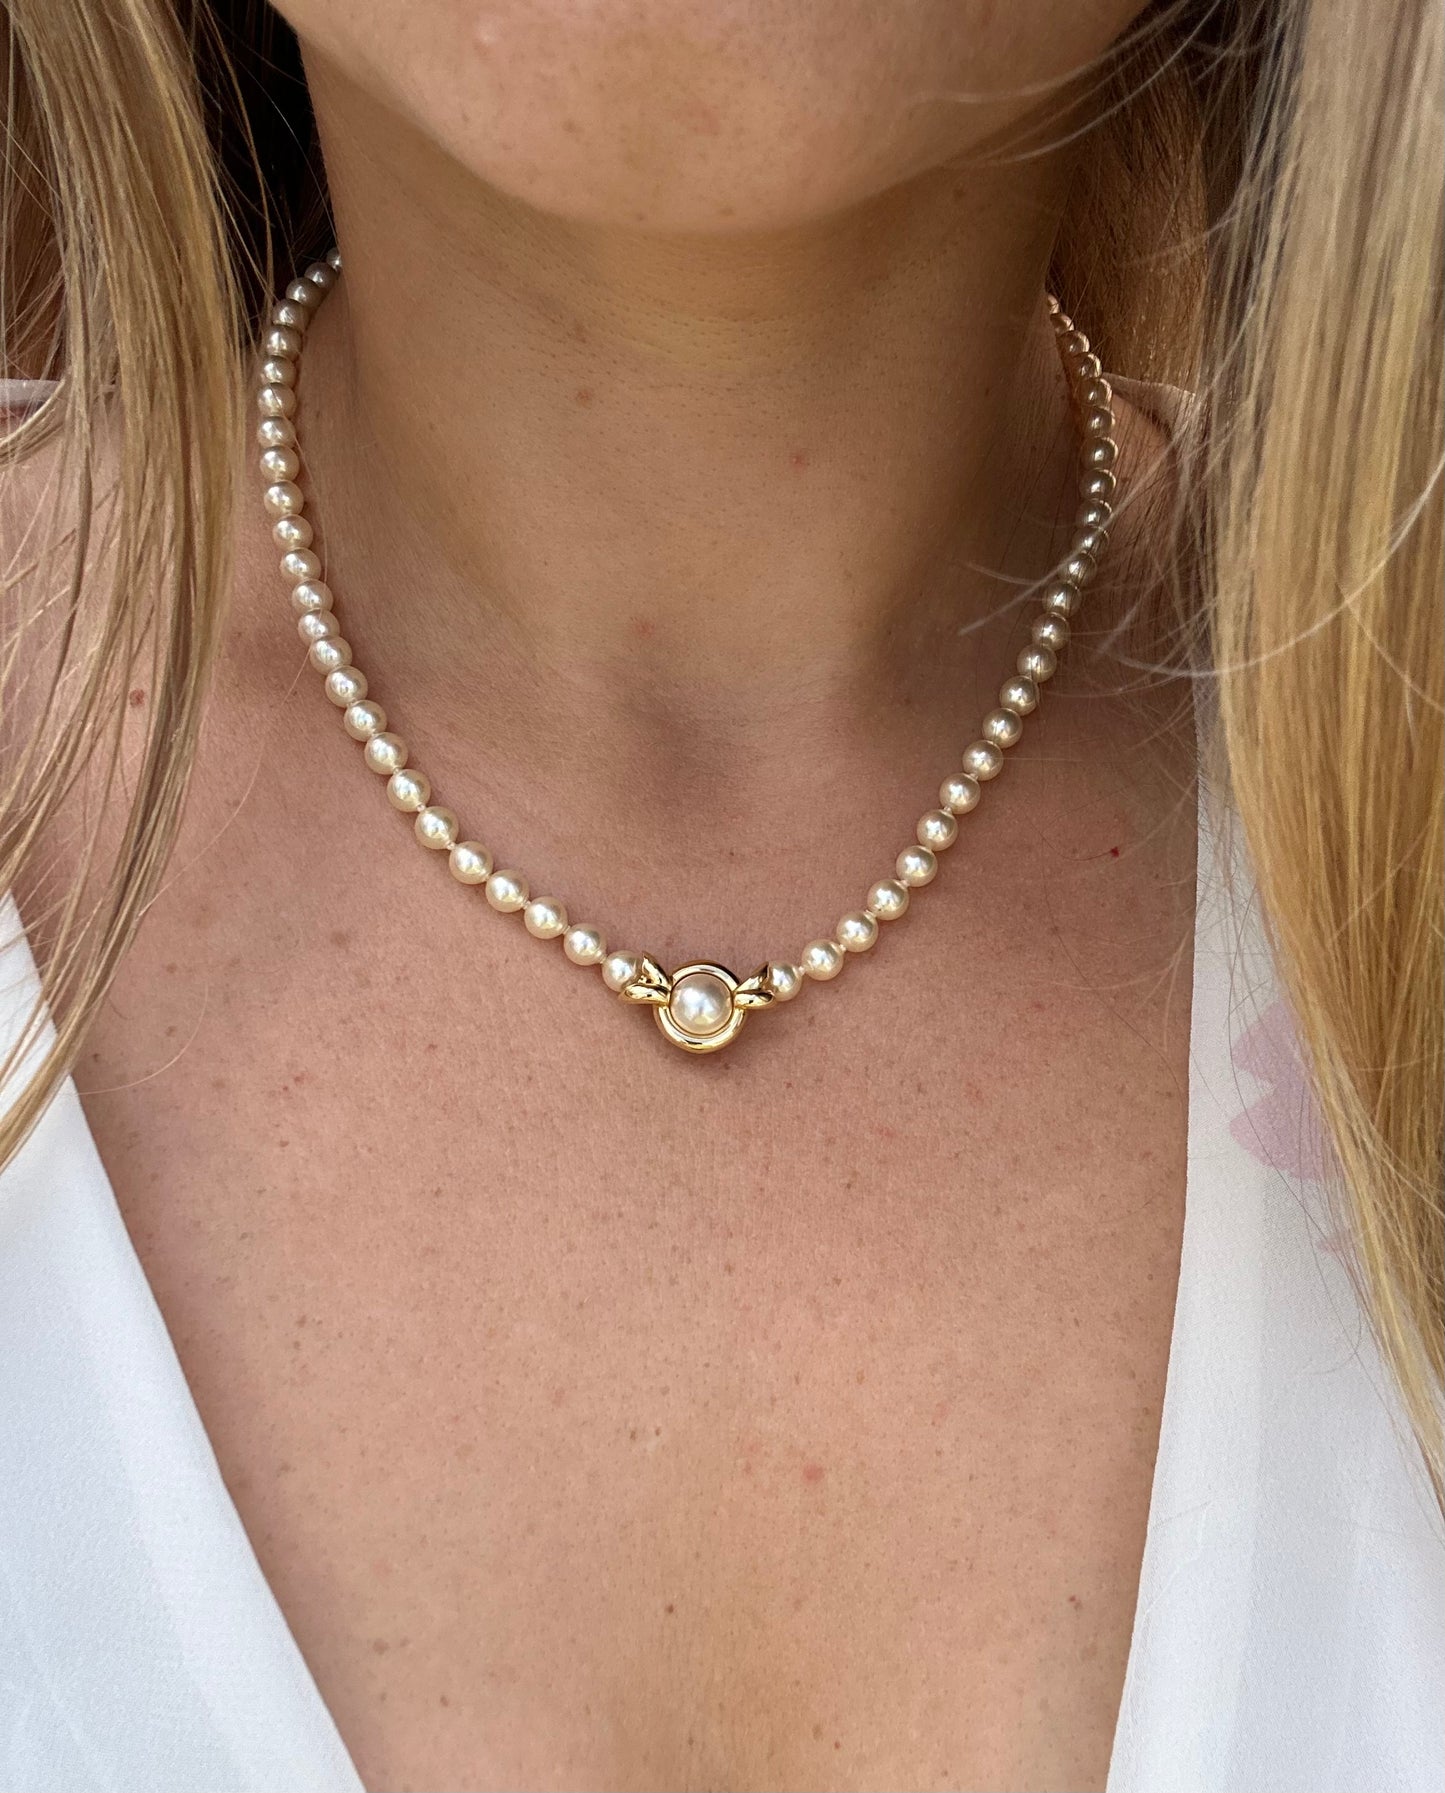 18k Akoya Pearl Necklace. High Quality Designer 18in length 5.5mm AKOYA pearls with warm hue. 18k PMS Designer Pearls necklace. st(115)